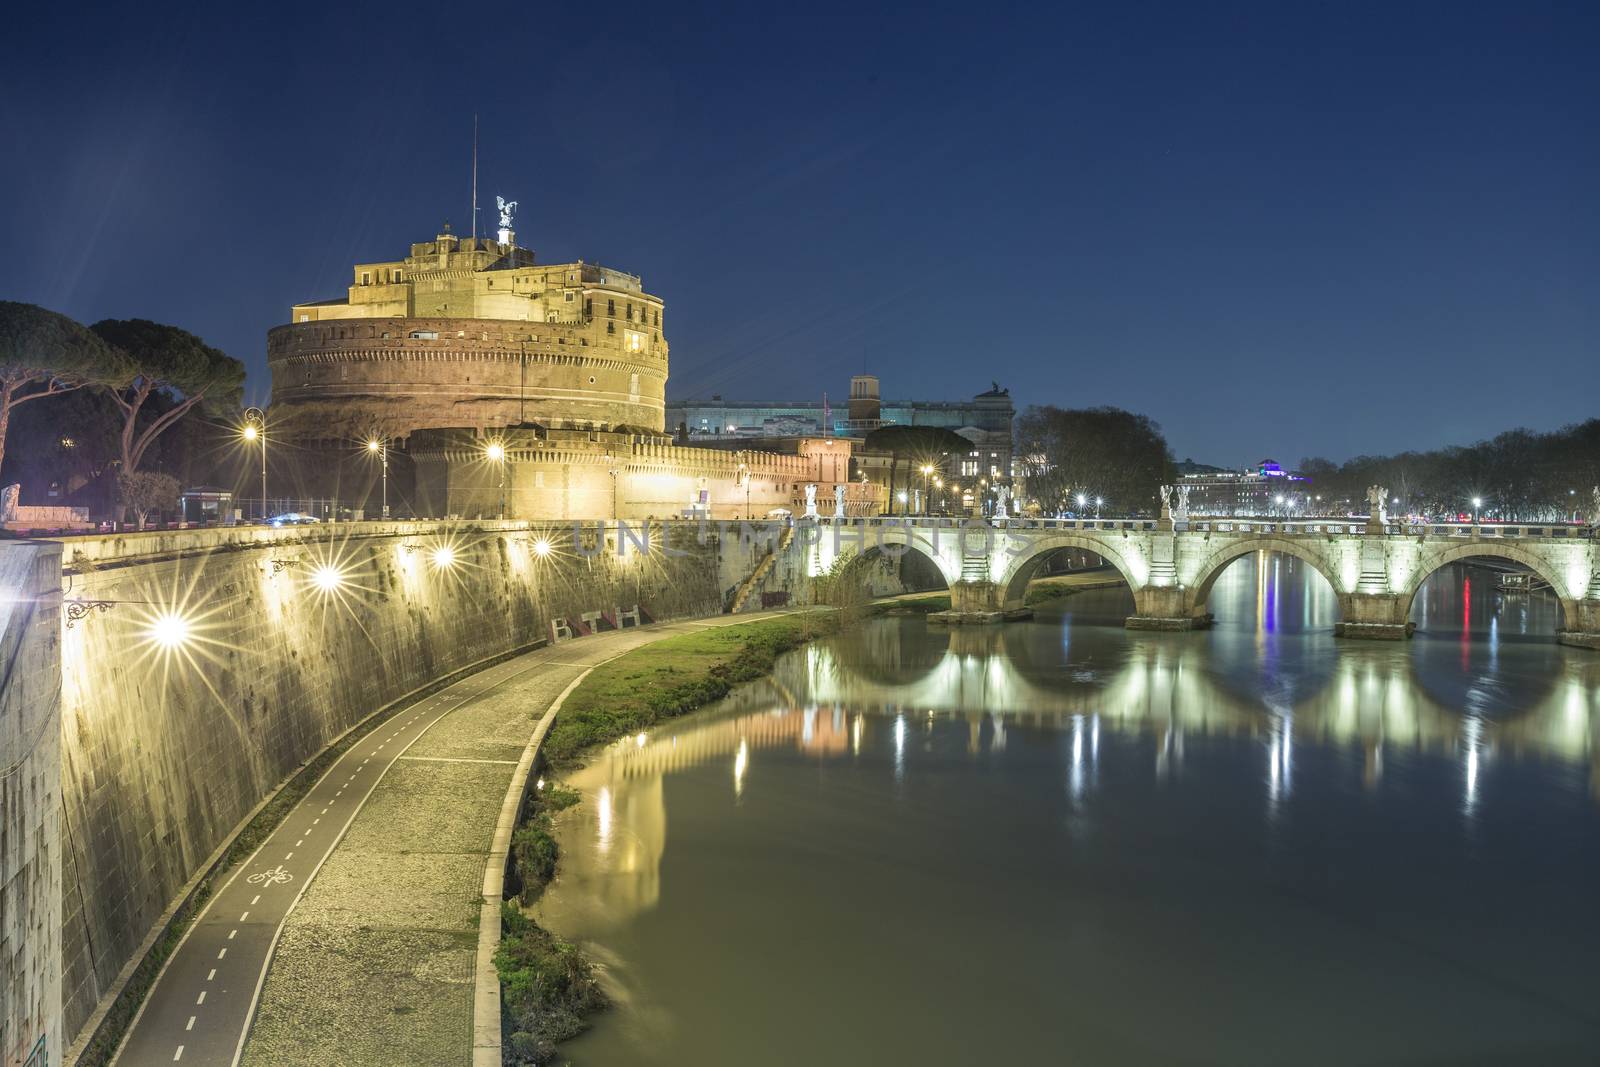 Saint Angel Castle and bridge over the Tiber river in Rome